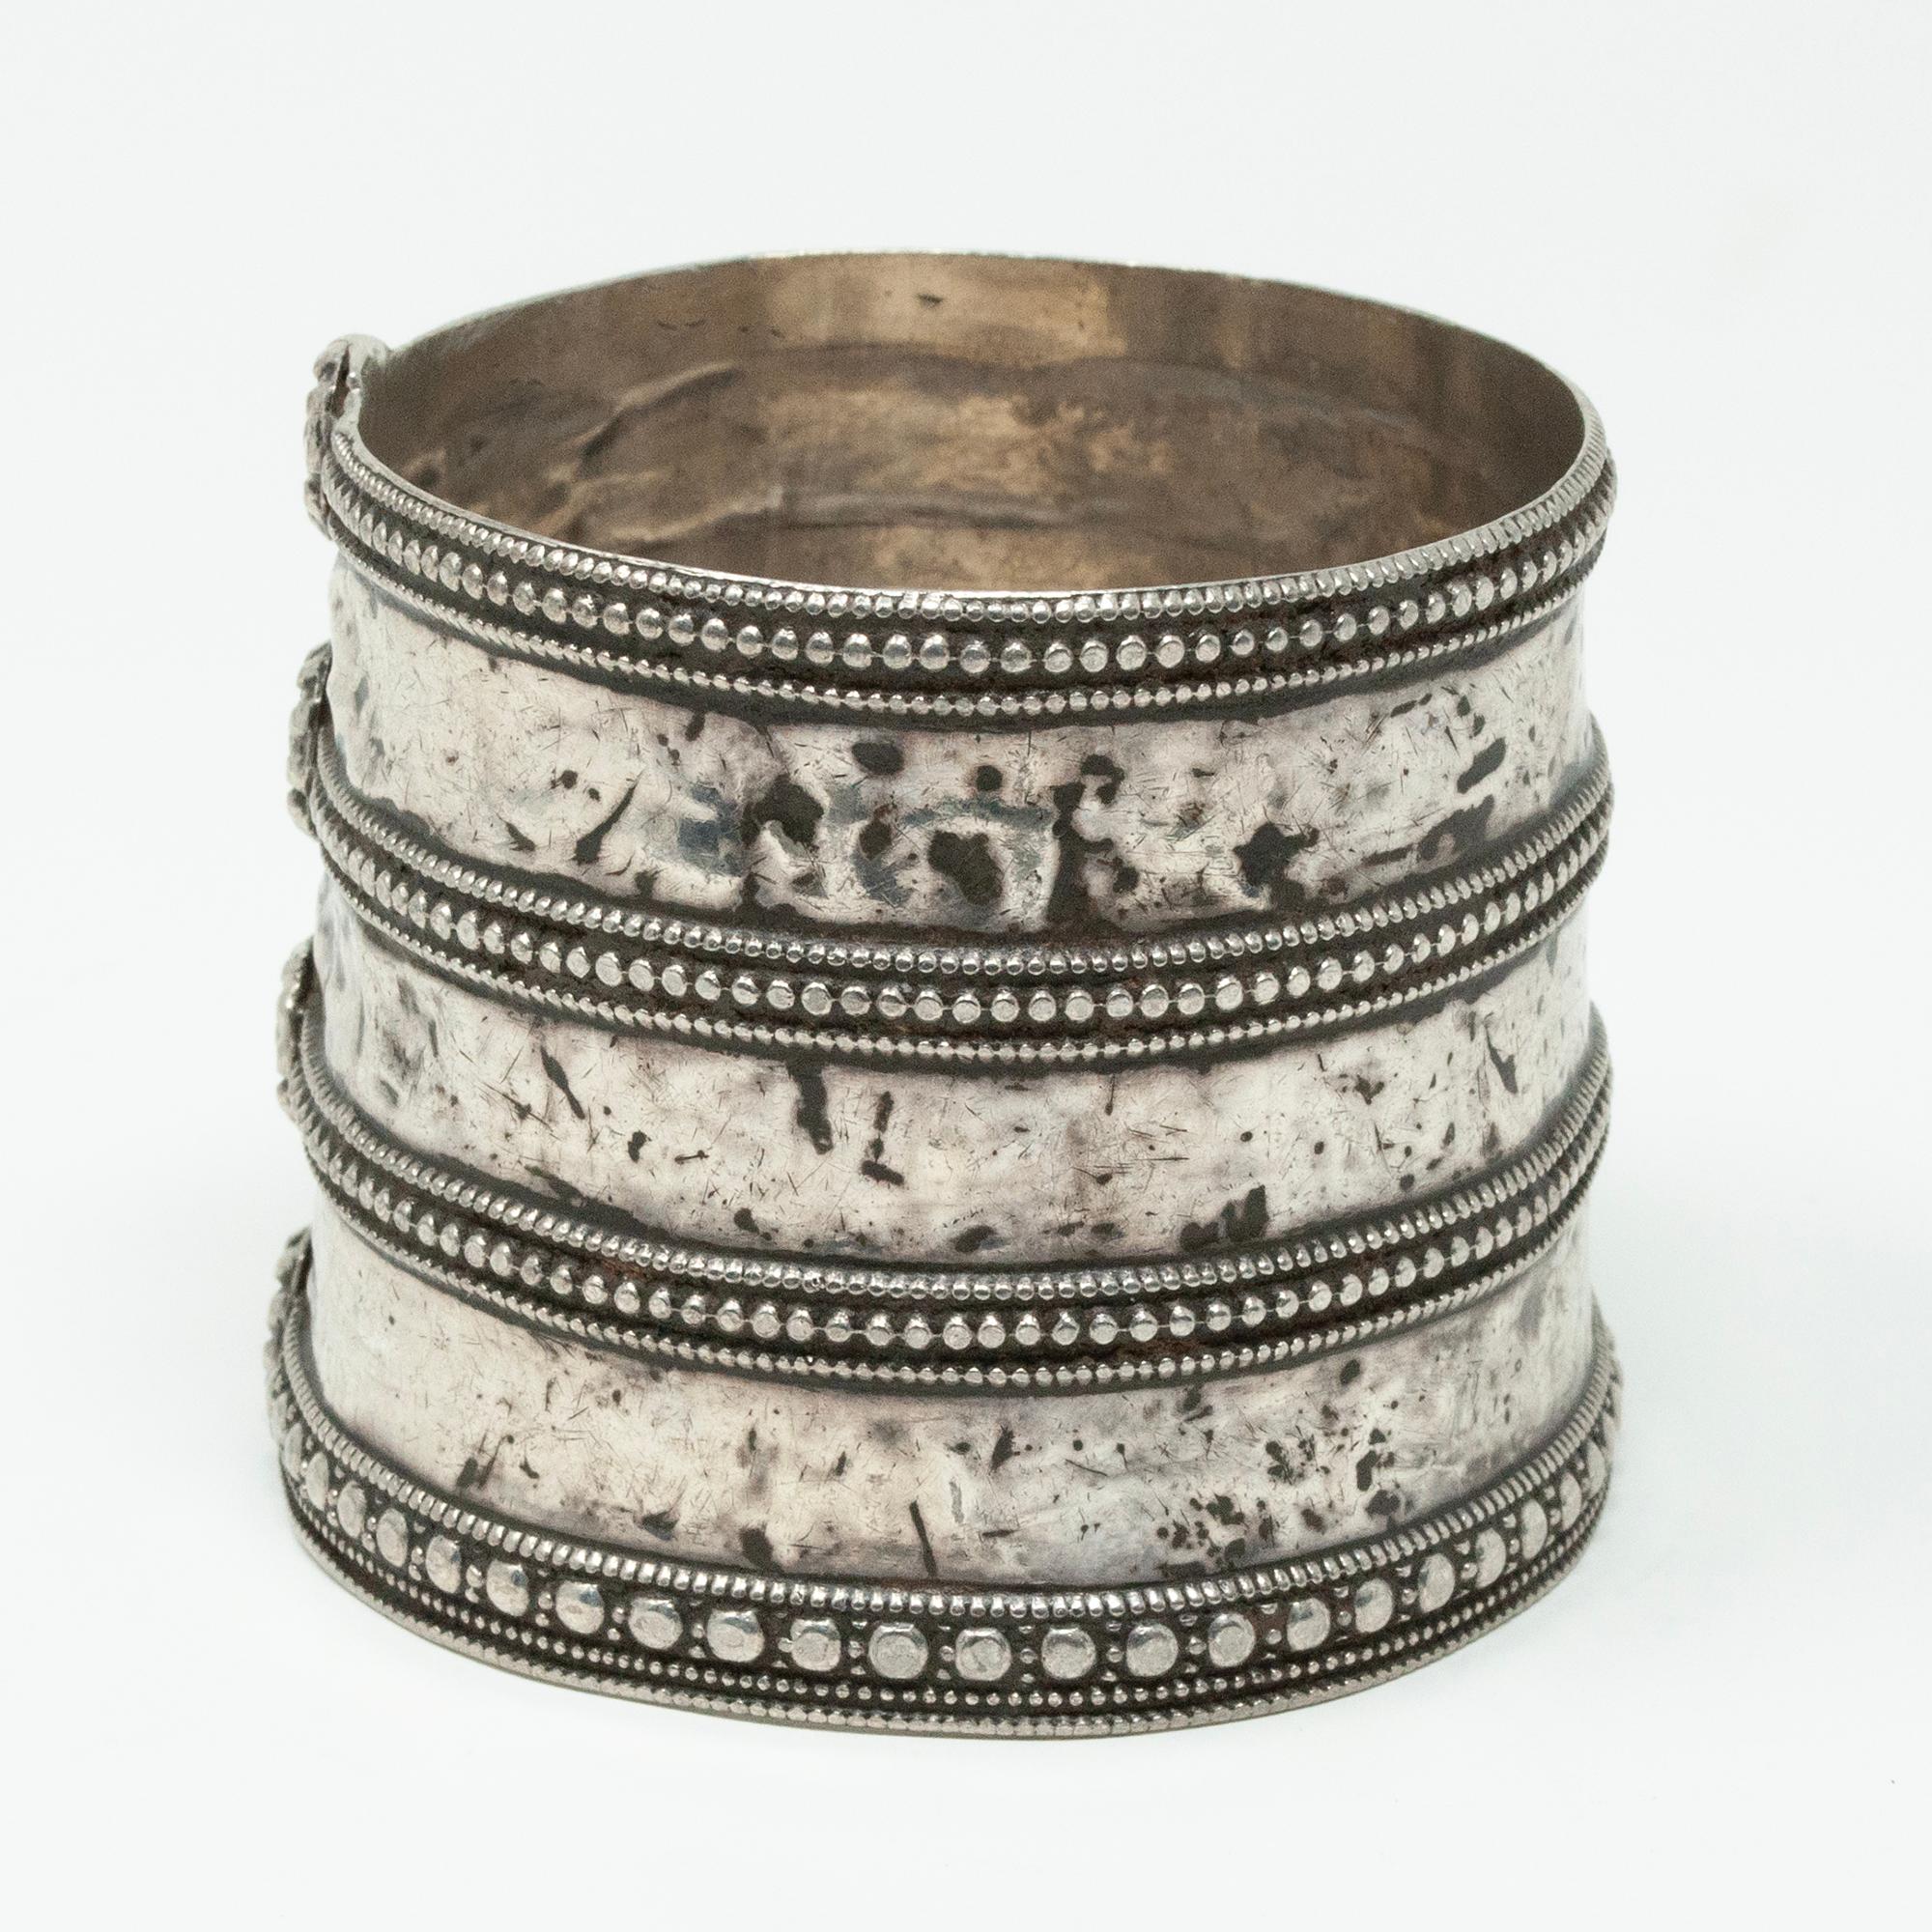 Antique Silver Cuff, Rajasthan, India

An antique silver cuff from Rajasthan (Rabari people), India. It measures 2.75 inches high and is 2.75 inches in diameter at the narrower end, 3 inches at the wider end. The weight is 76 grams.
